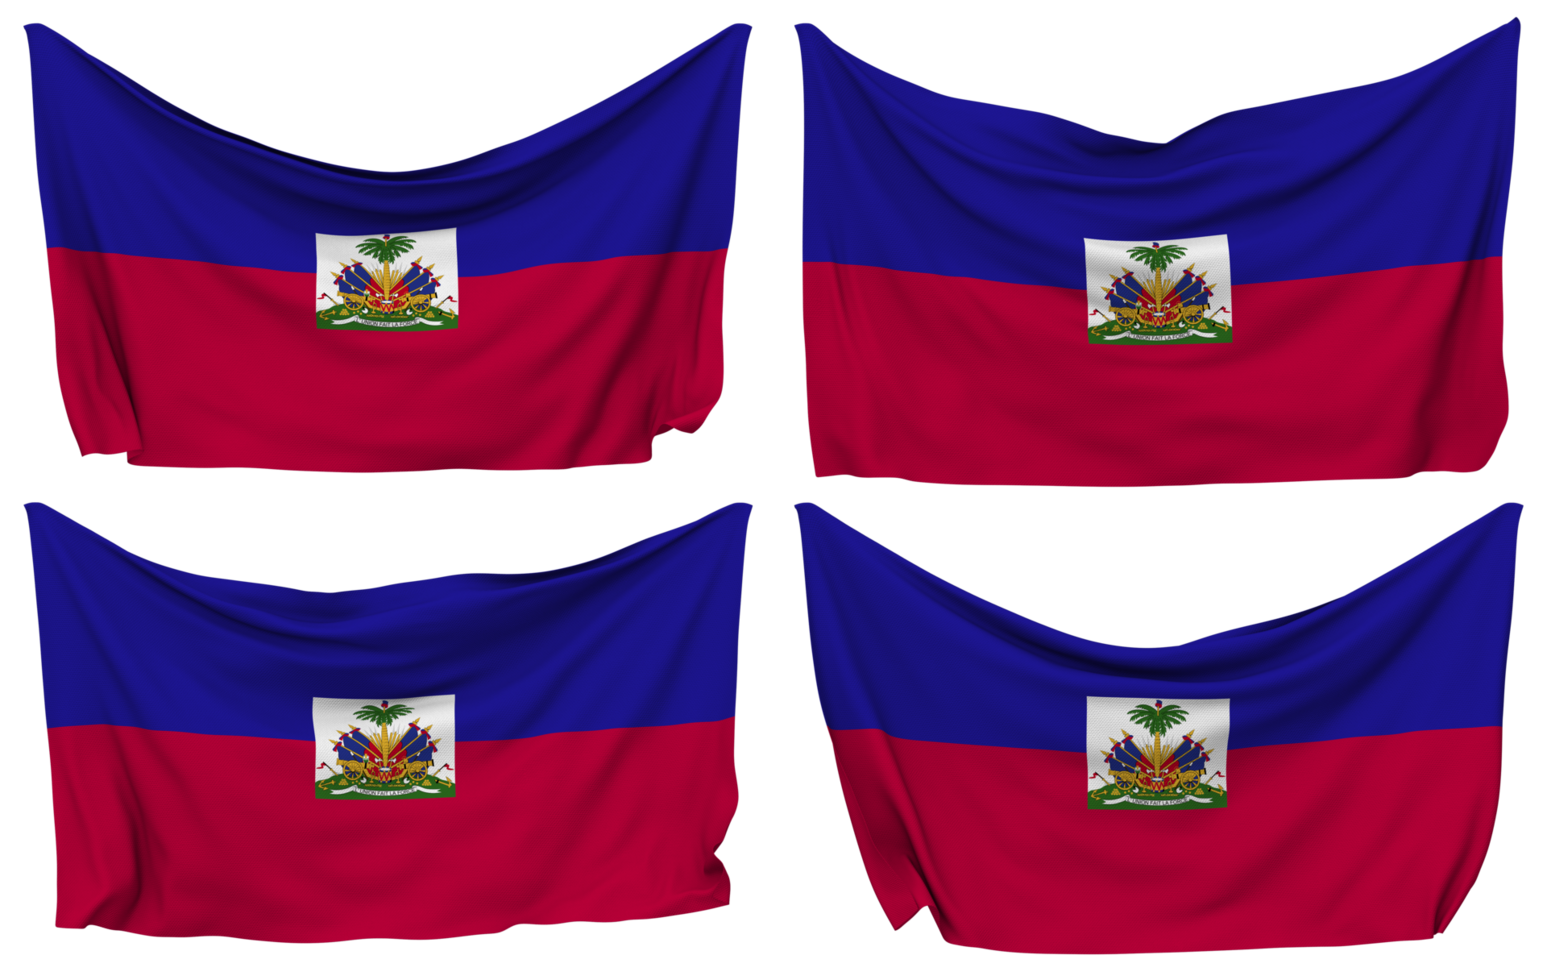 Haiti Pinned Flag from Corners, Isolated with Different Waving Variations, 3D Rendering png